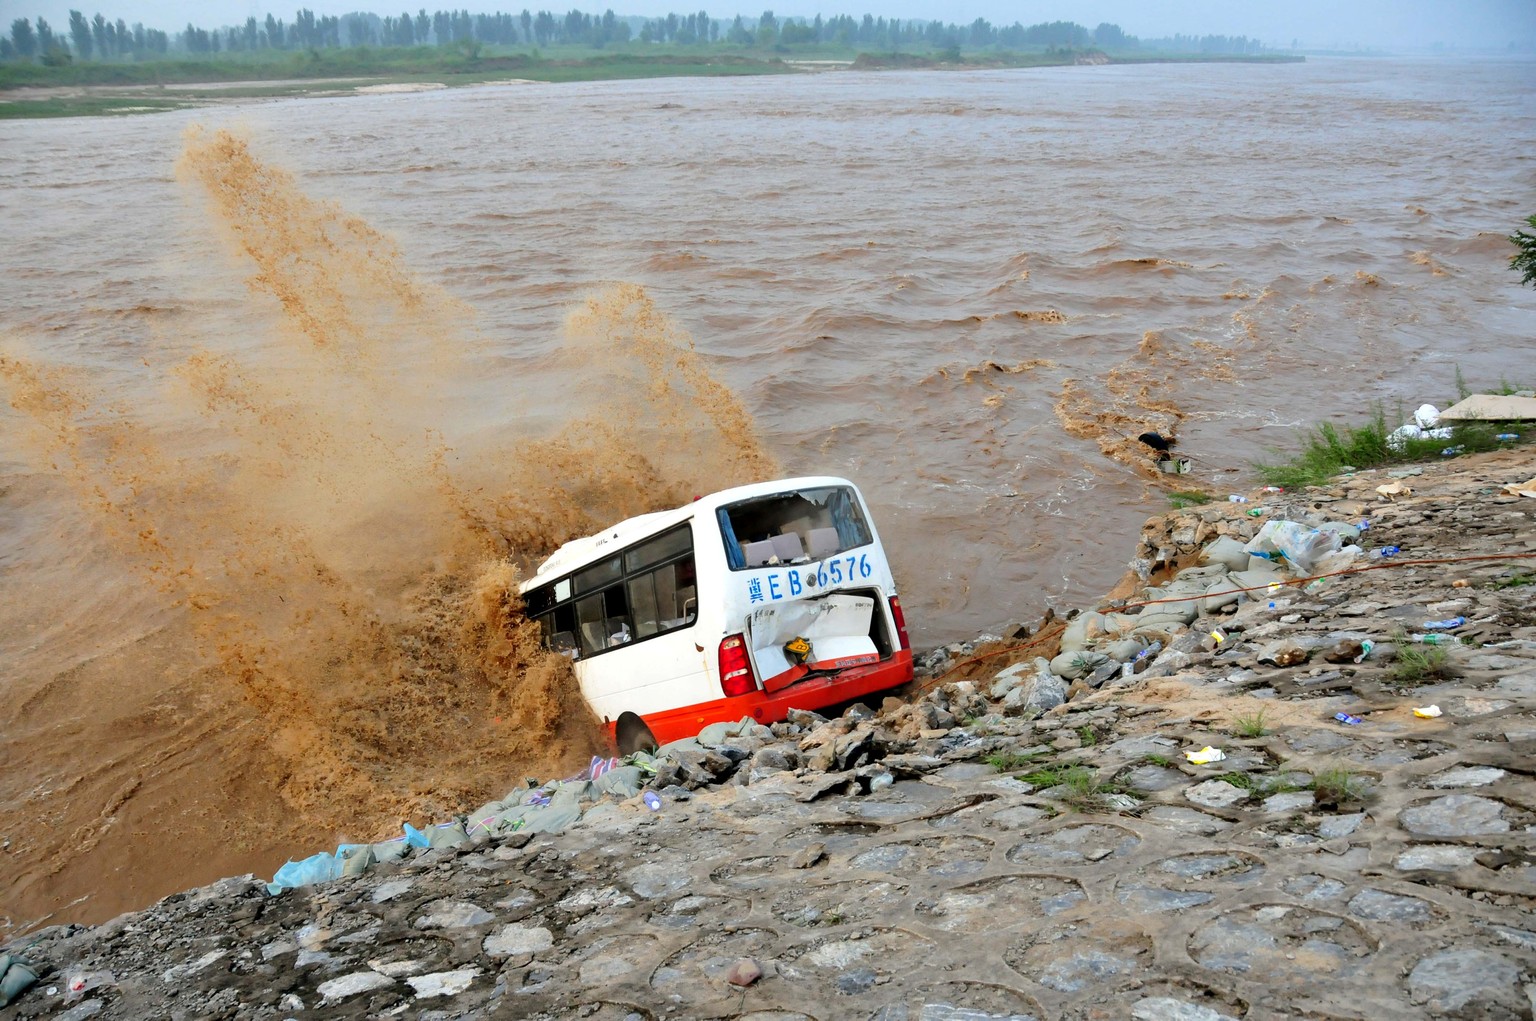 An abandoned bus filled with sand bags is used to build a makeshift dike at a flooded area in Xingtai, Hebei Province, China, July 21, 2016. Picture taken July 21, 2016. REUTERS/Stringer ATTENTION EDI ...